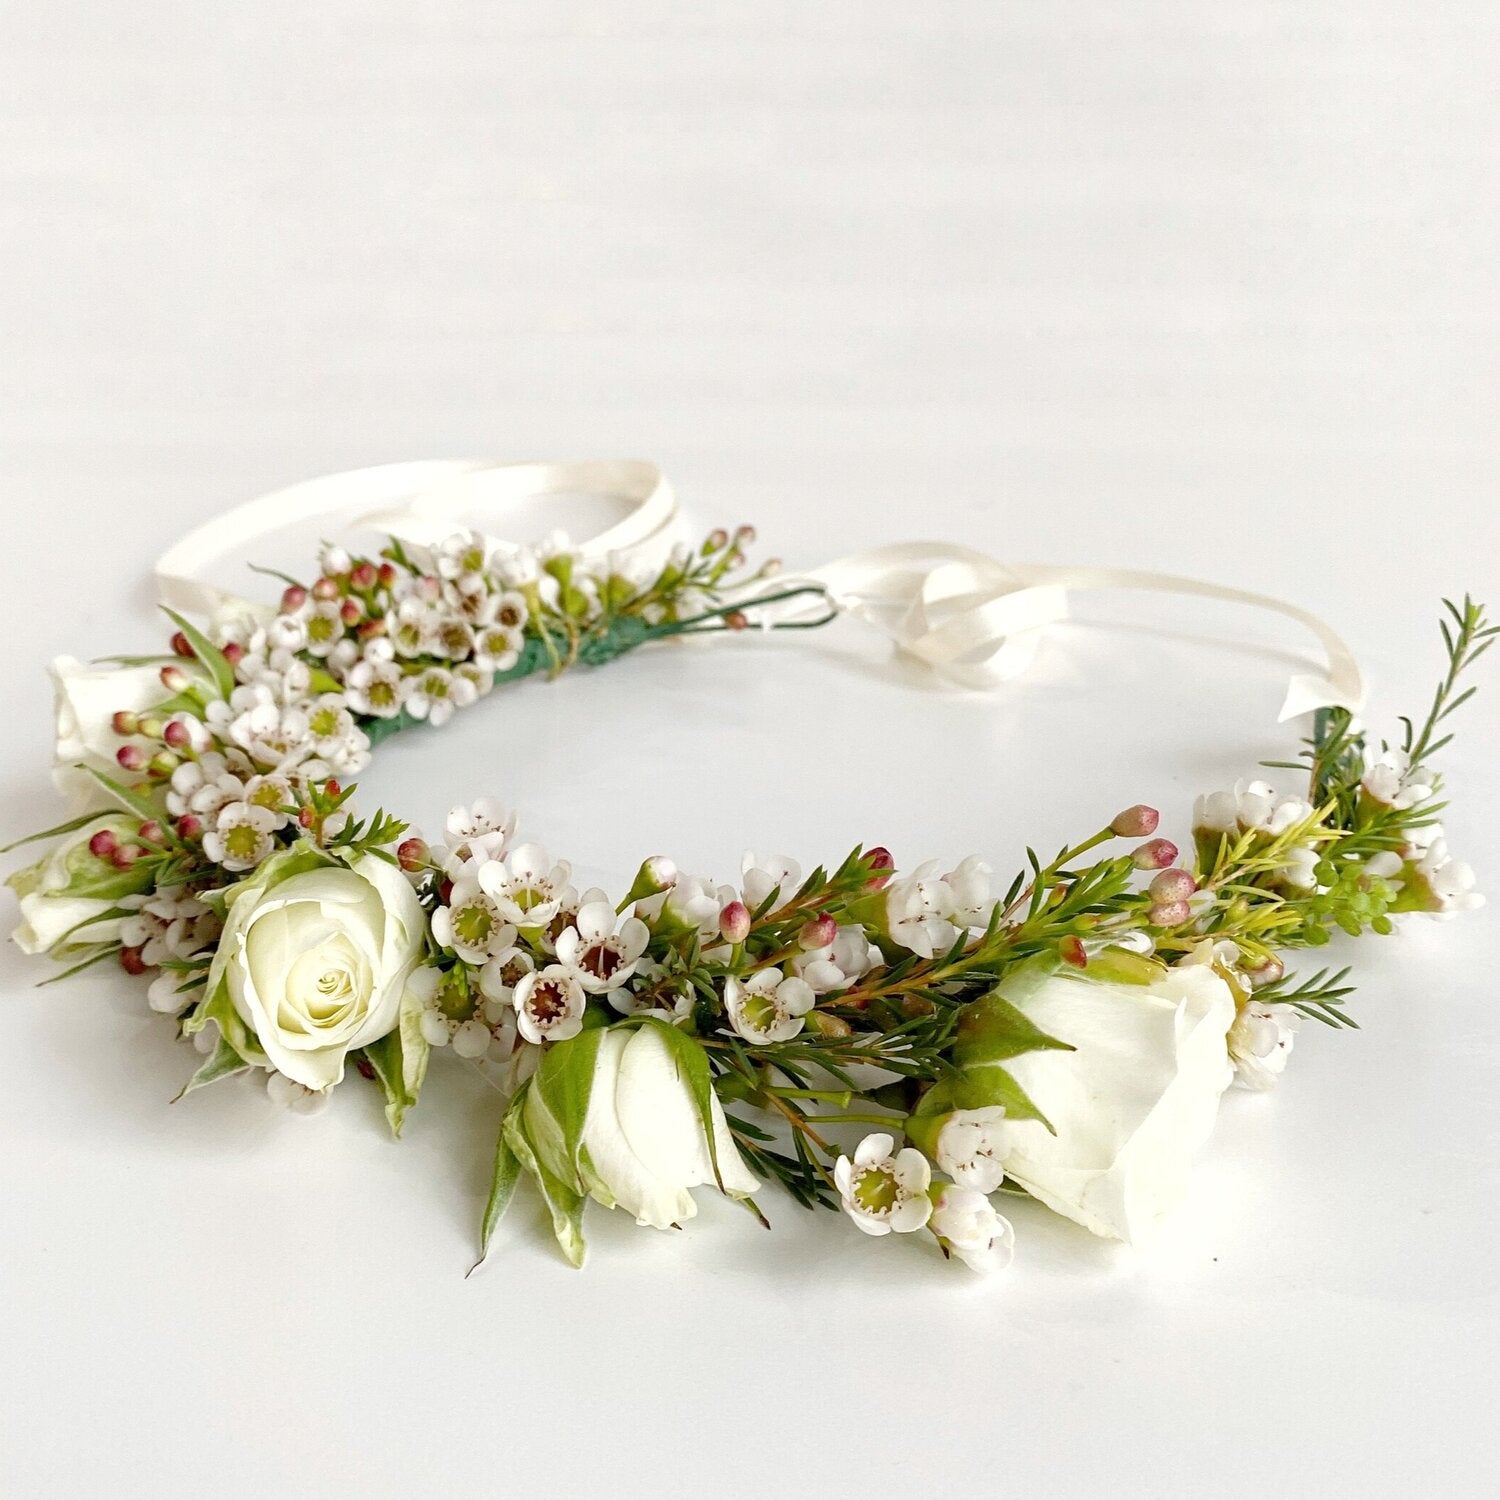 Flower crown tied with white satin ribbon featuring varying white flowers. Arranged in Memphis, TN by Everbloom Design.